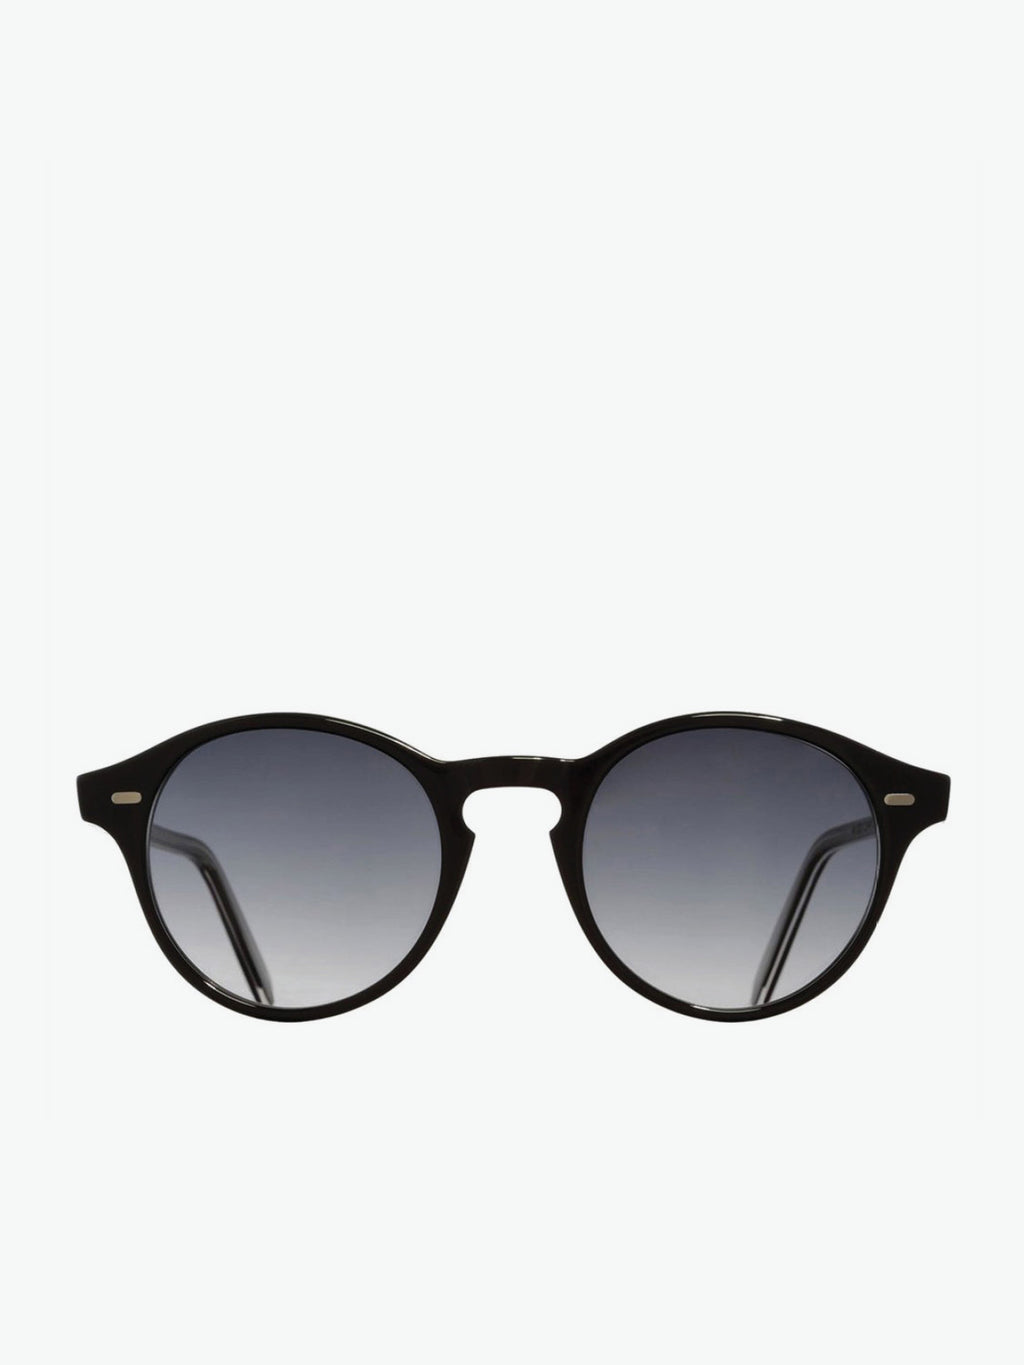 Cutler and Gross Round Black Acetate Sunglasses | A